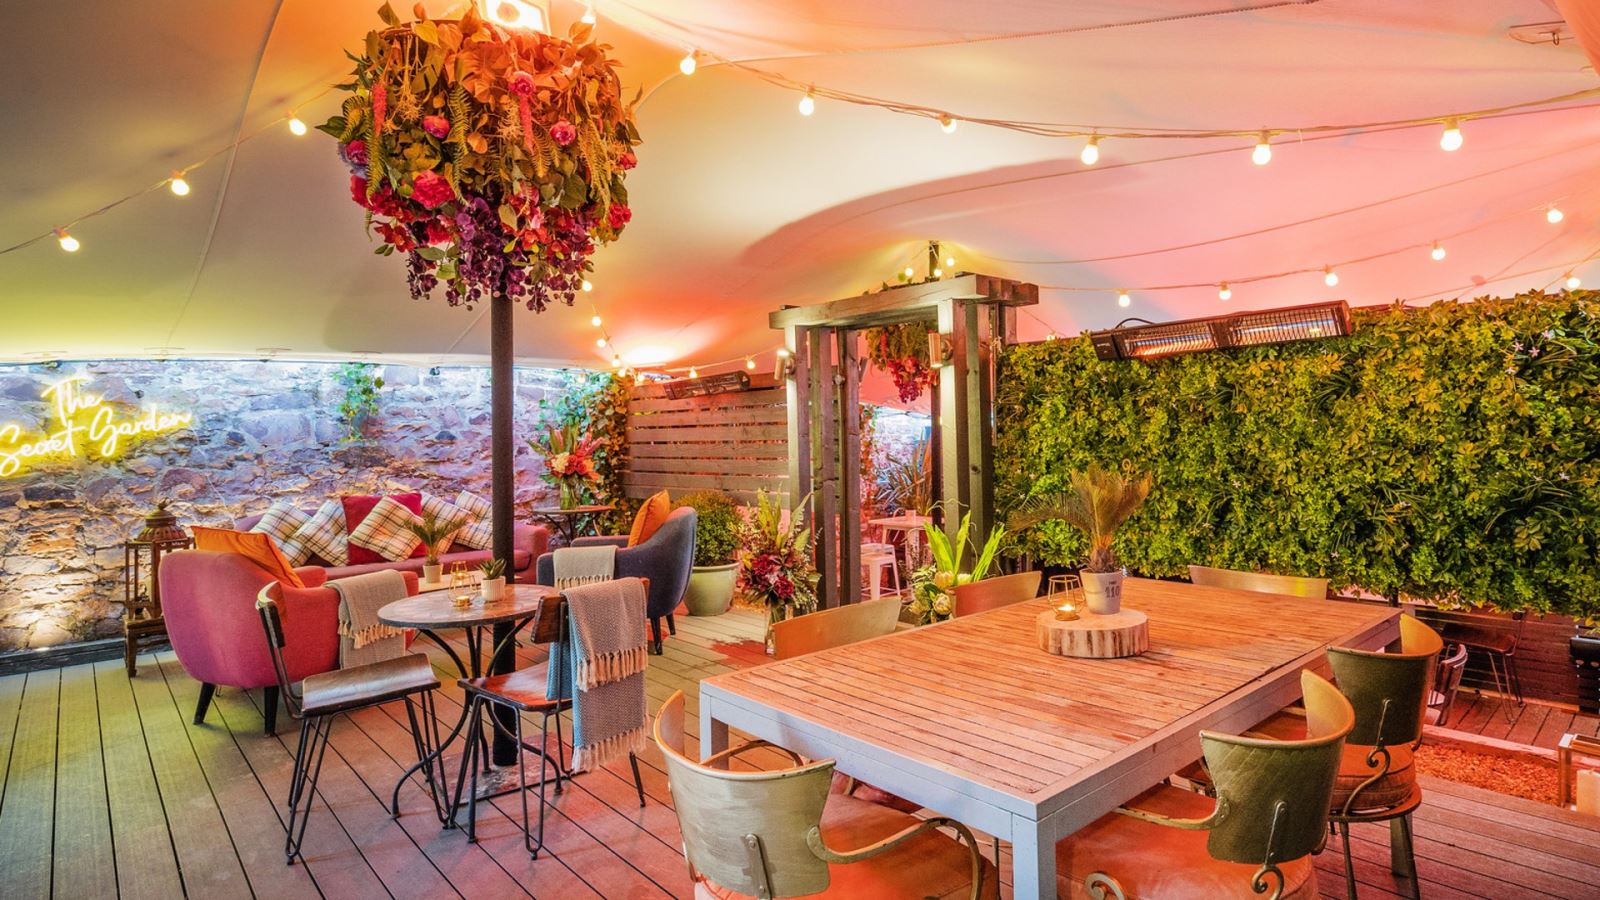 The Secret Garden event space at The Square Kitchen